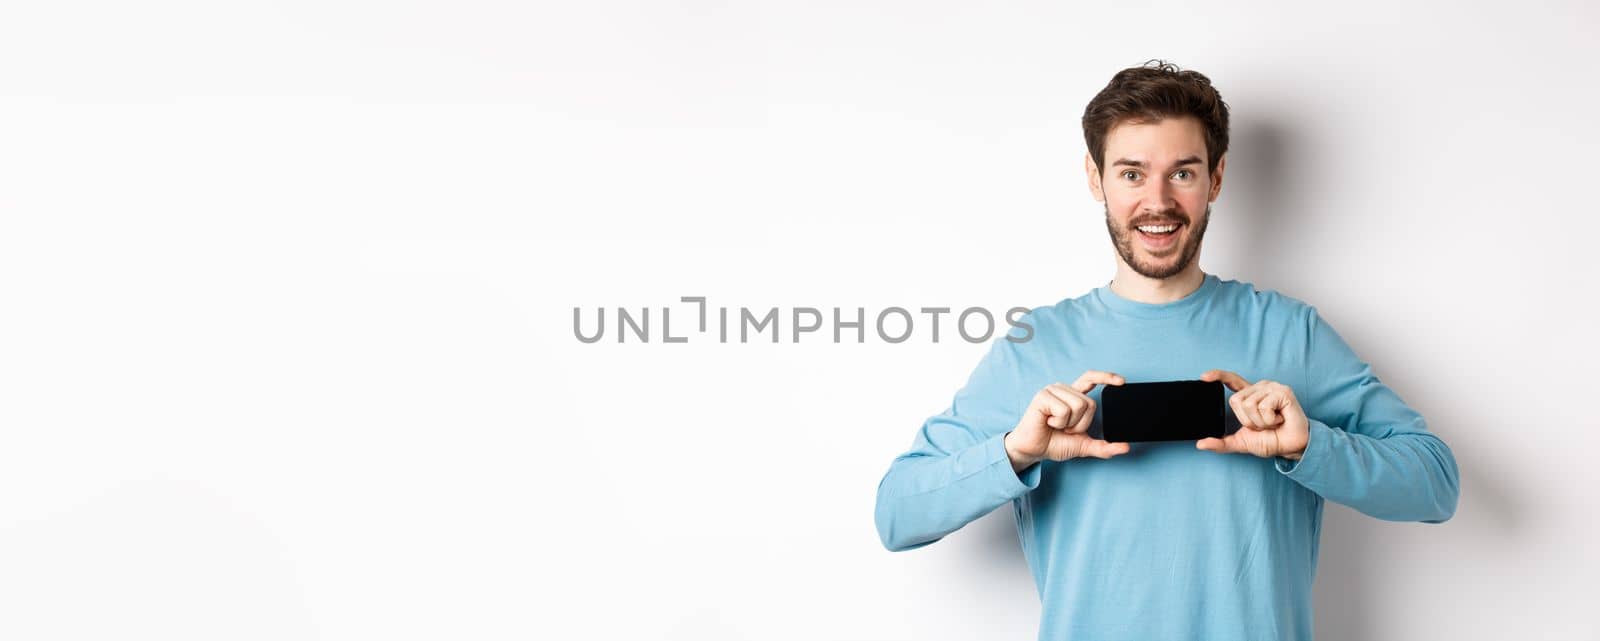 E-commerce and shopping concept. Smiling cheerful man showing empty smartphone screen in horizontal position, looking happy at camera, white background.